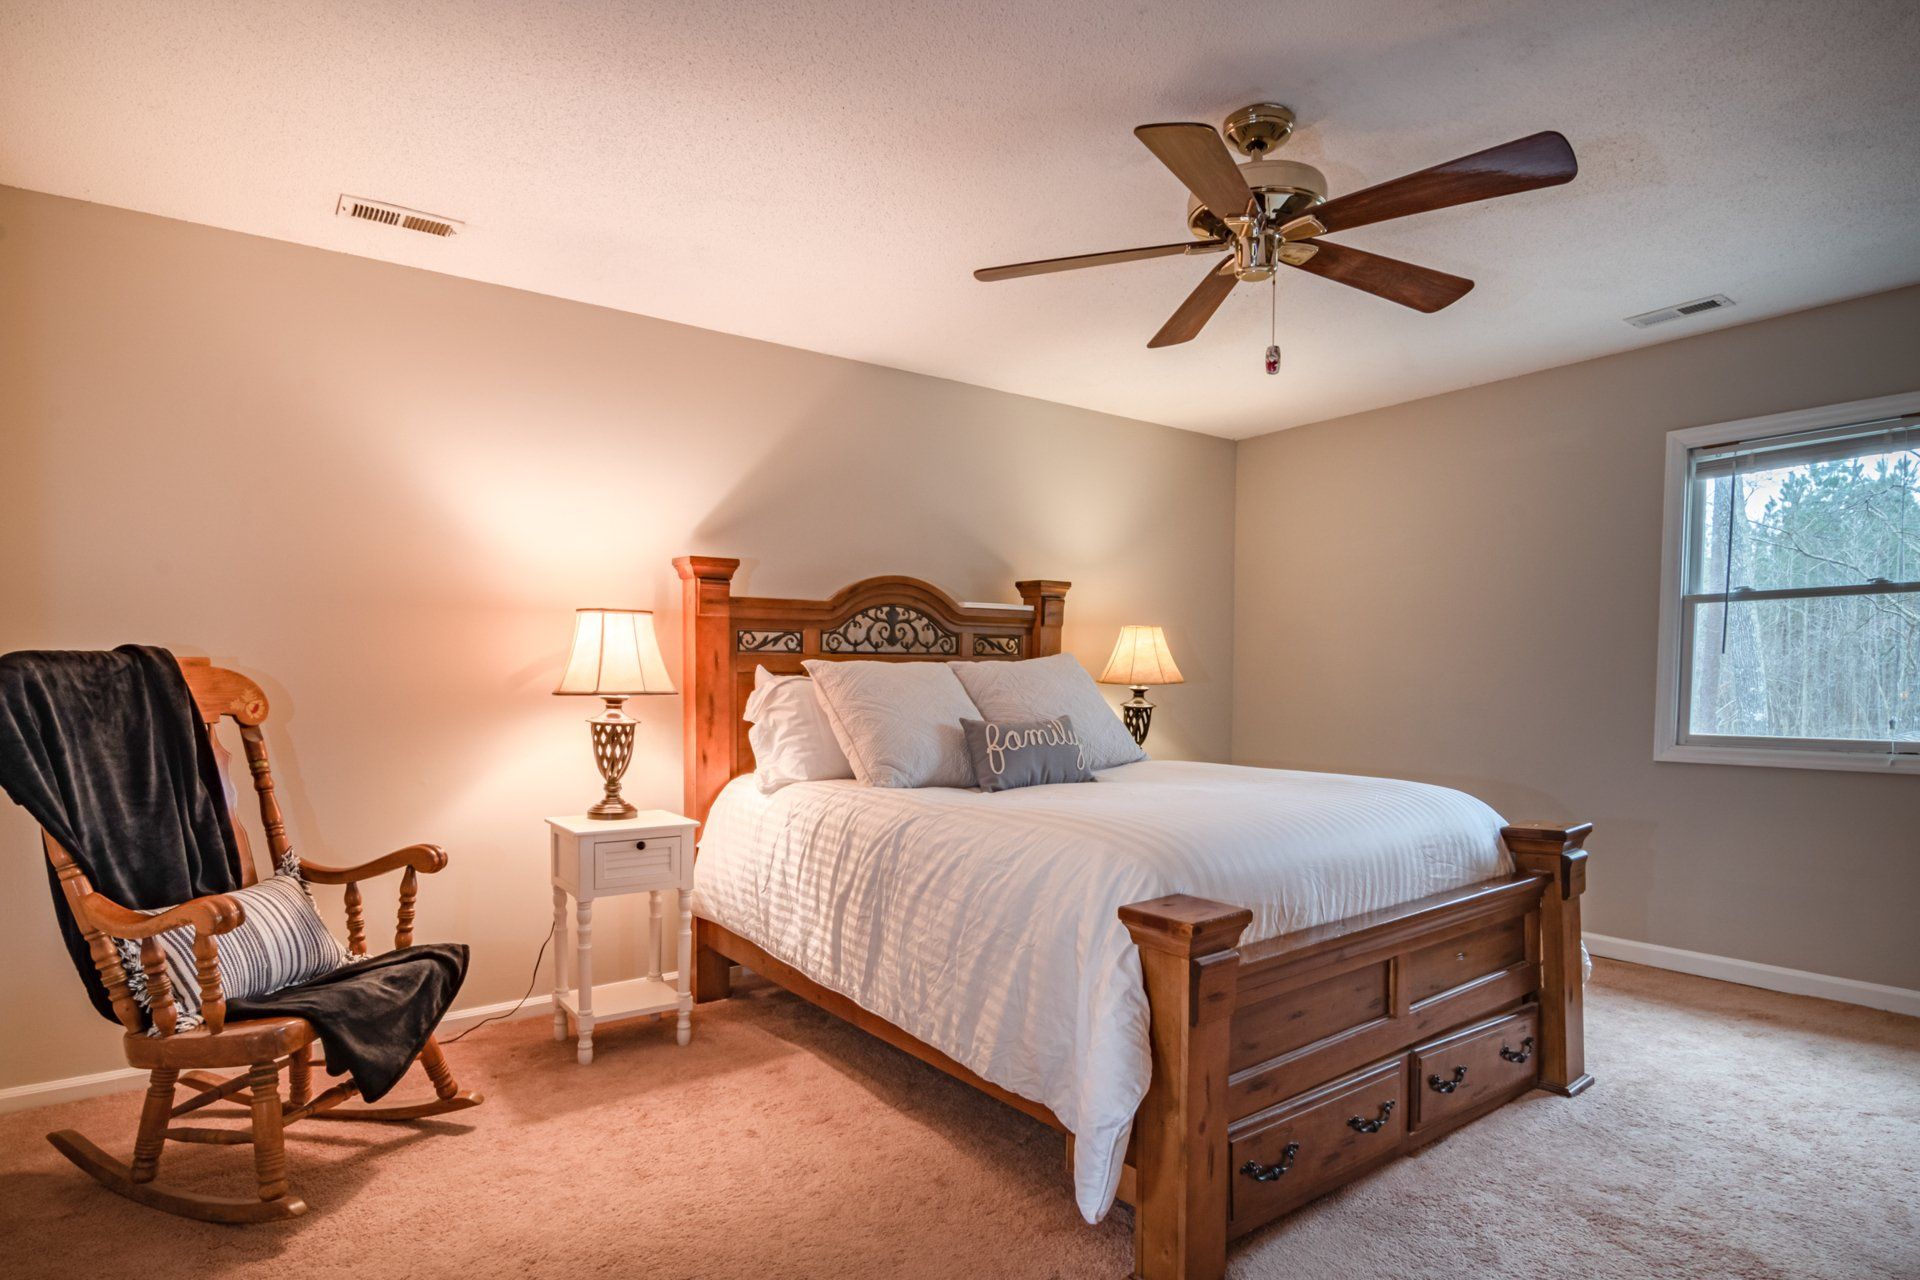 Picture of a Bedroom with a Ceiling Fan